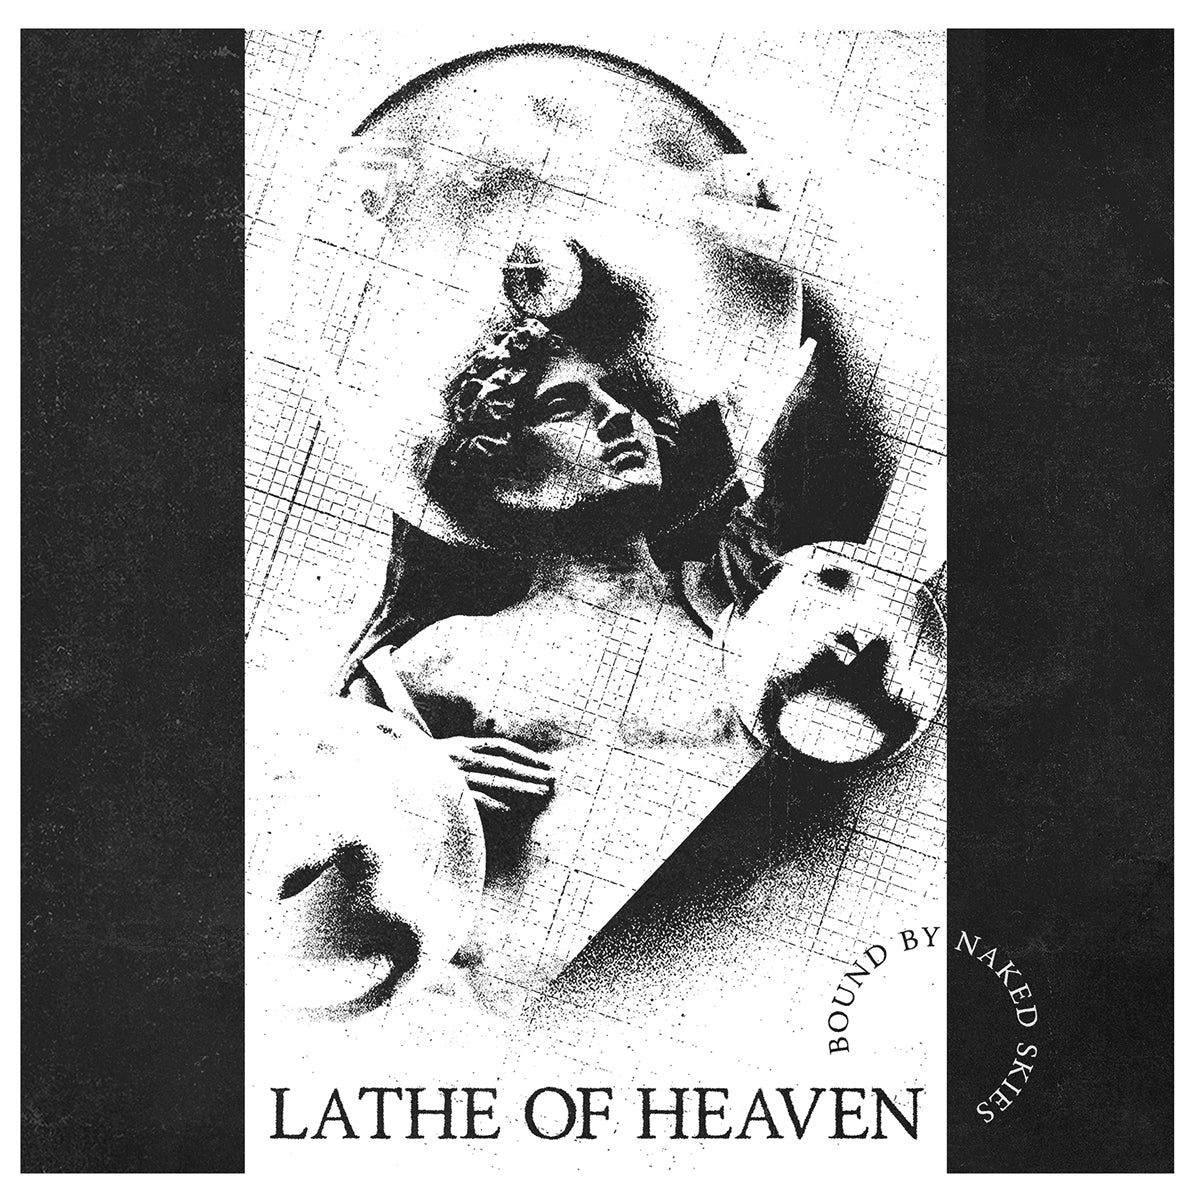 LATHE OF HEAVEN "Bound By Naked Skies" LP